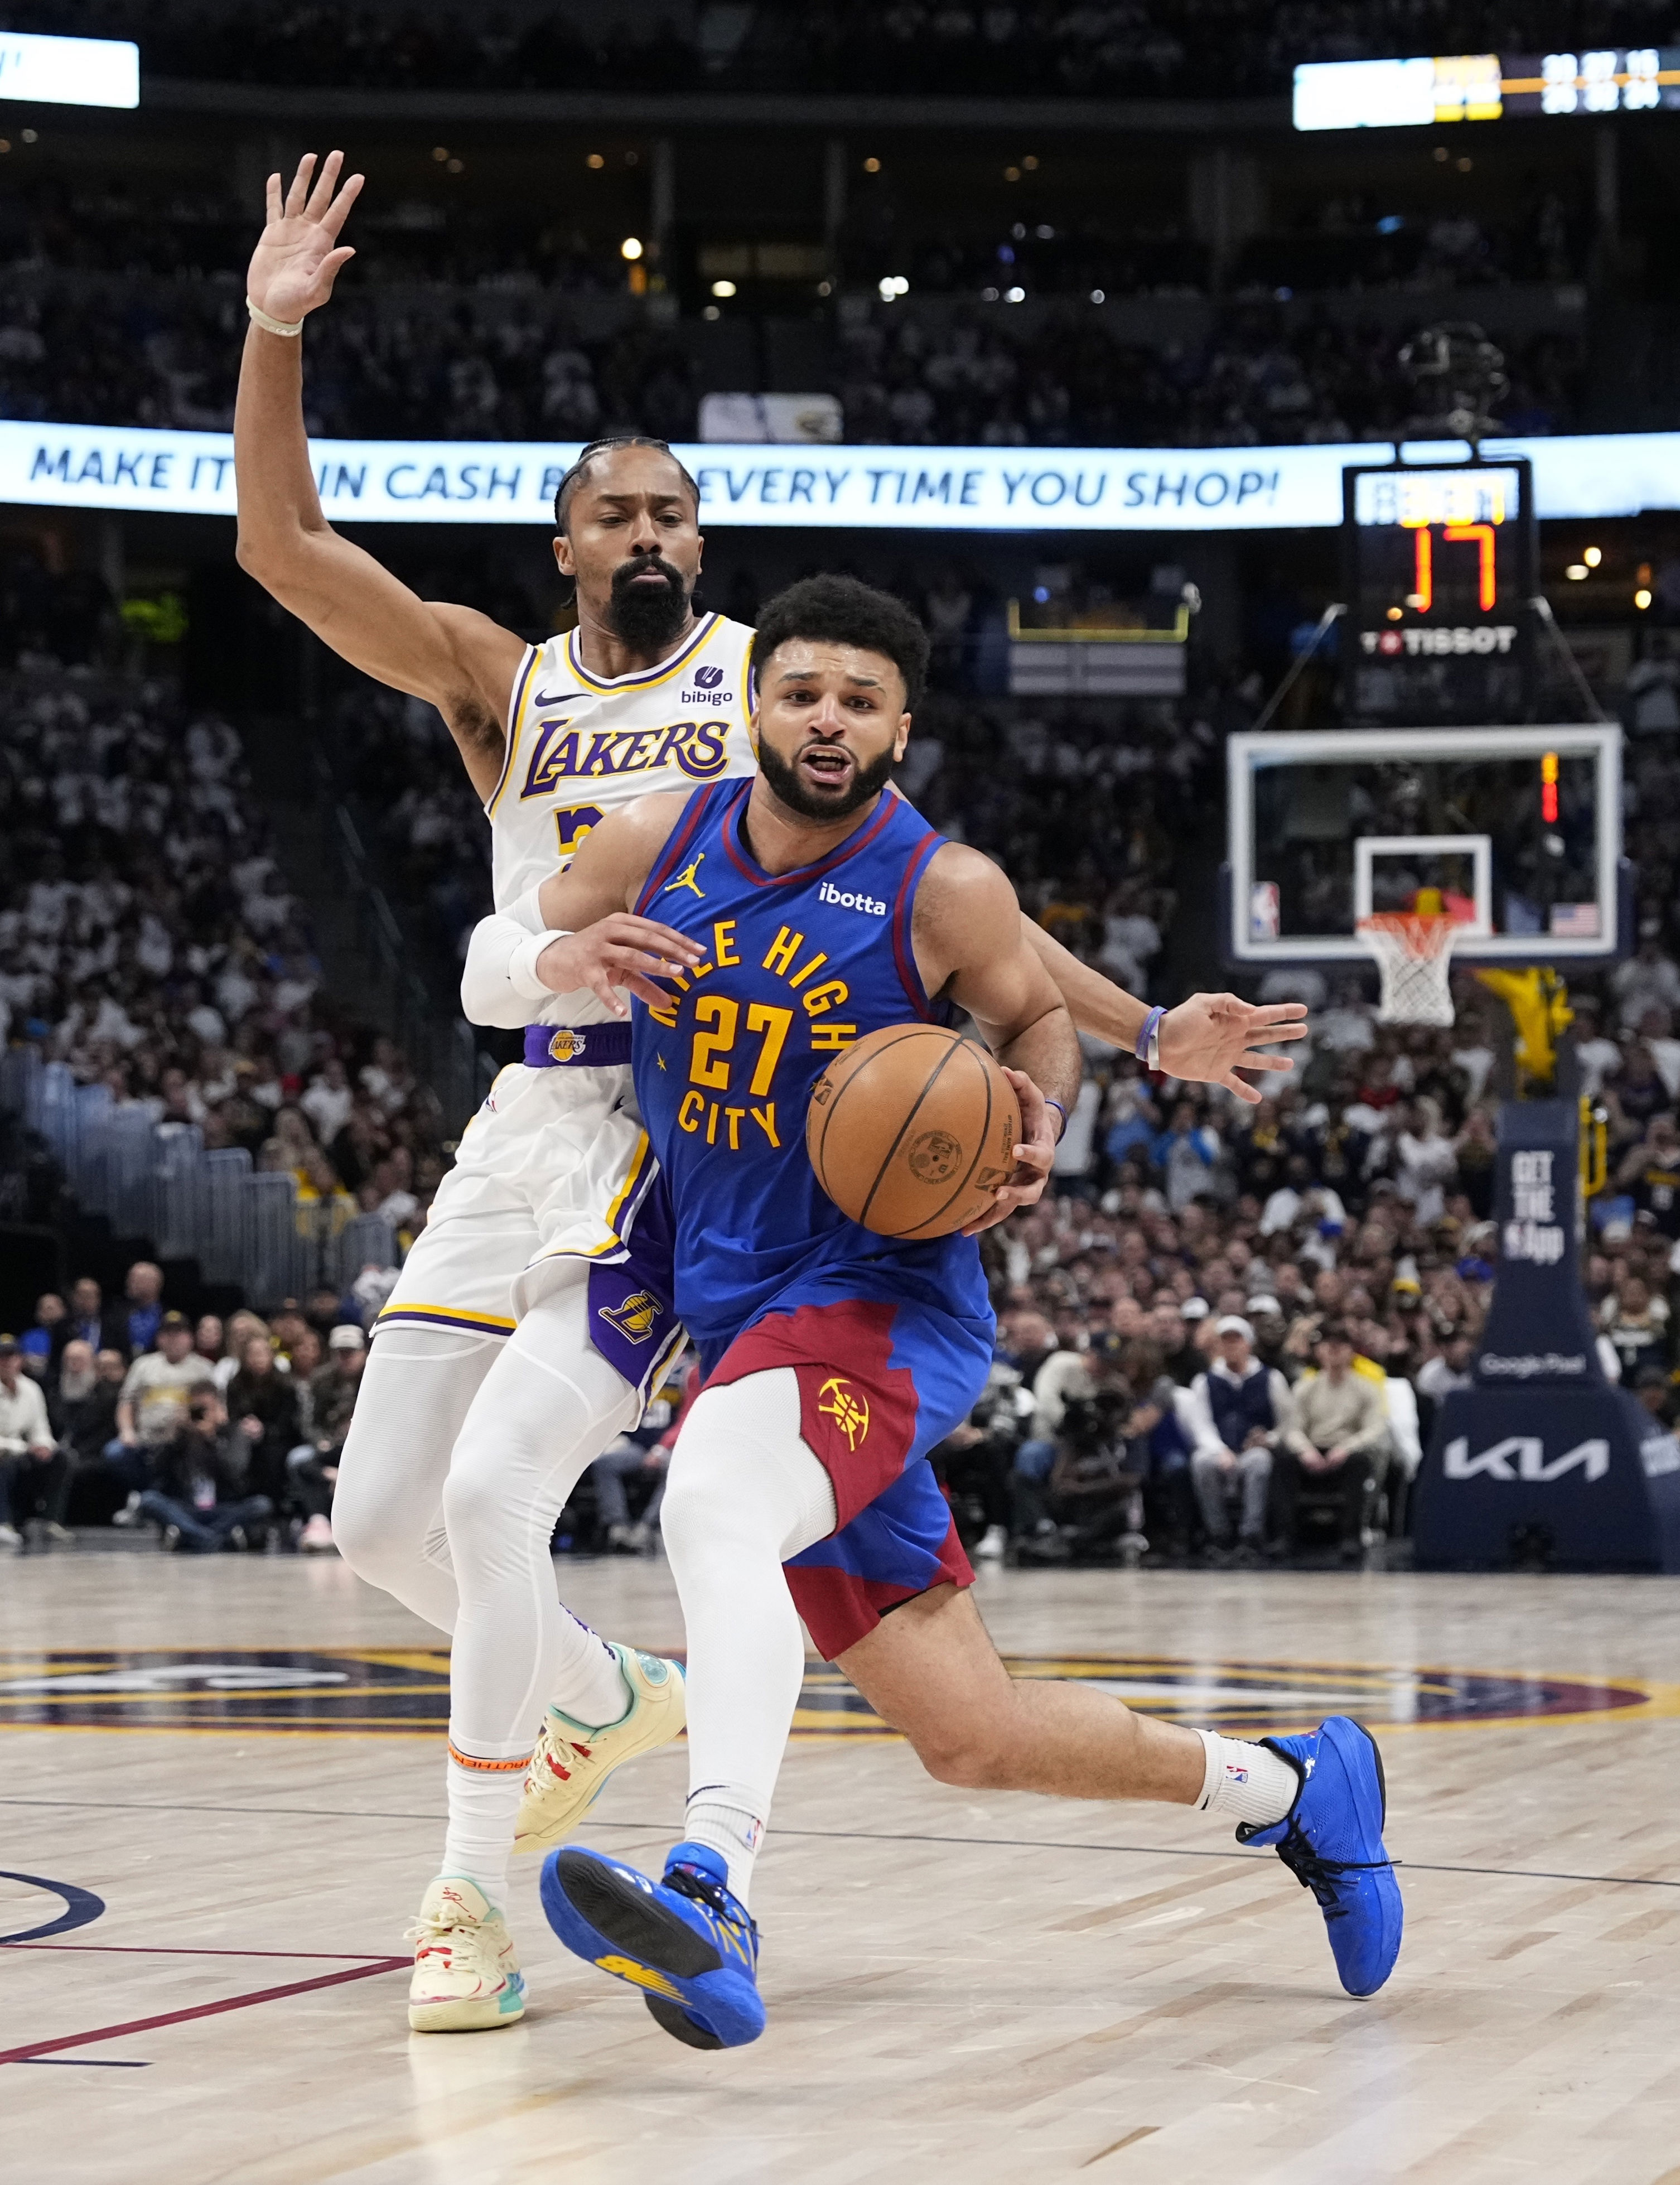 nikola jokic leads nba champ denver nuggets past lebron james and lakers 114-103 in playoff opener